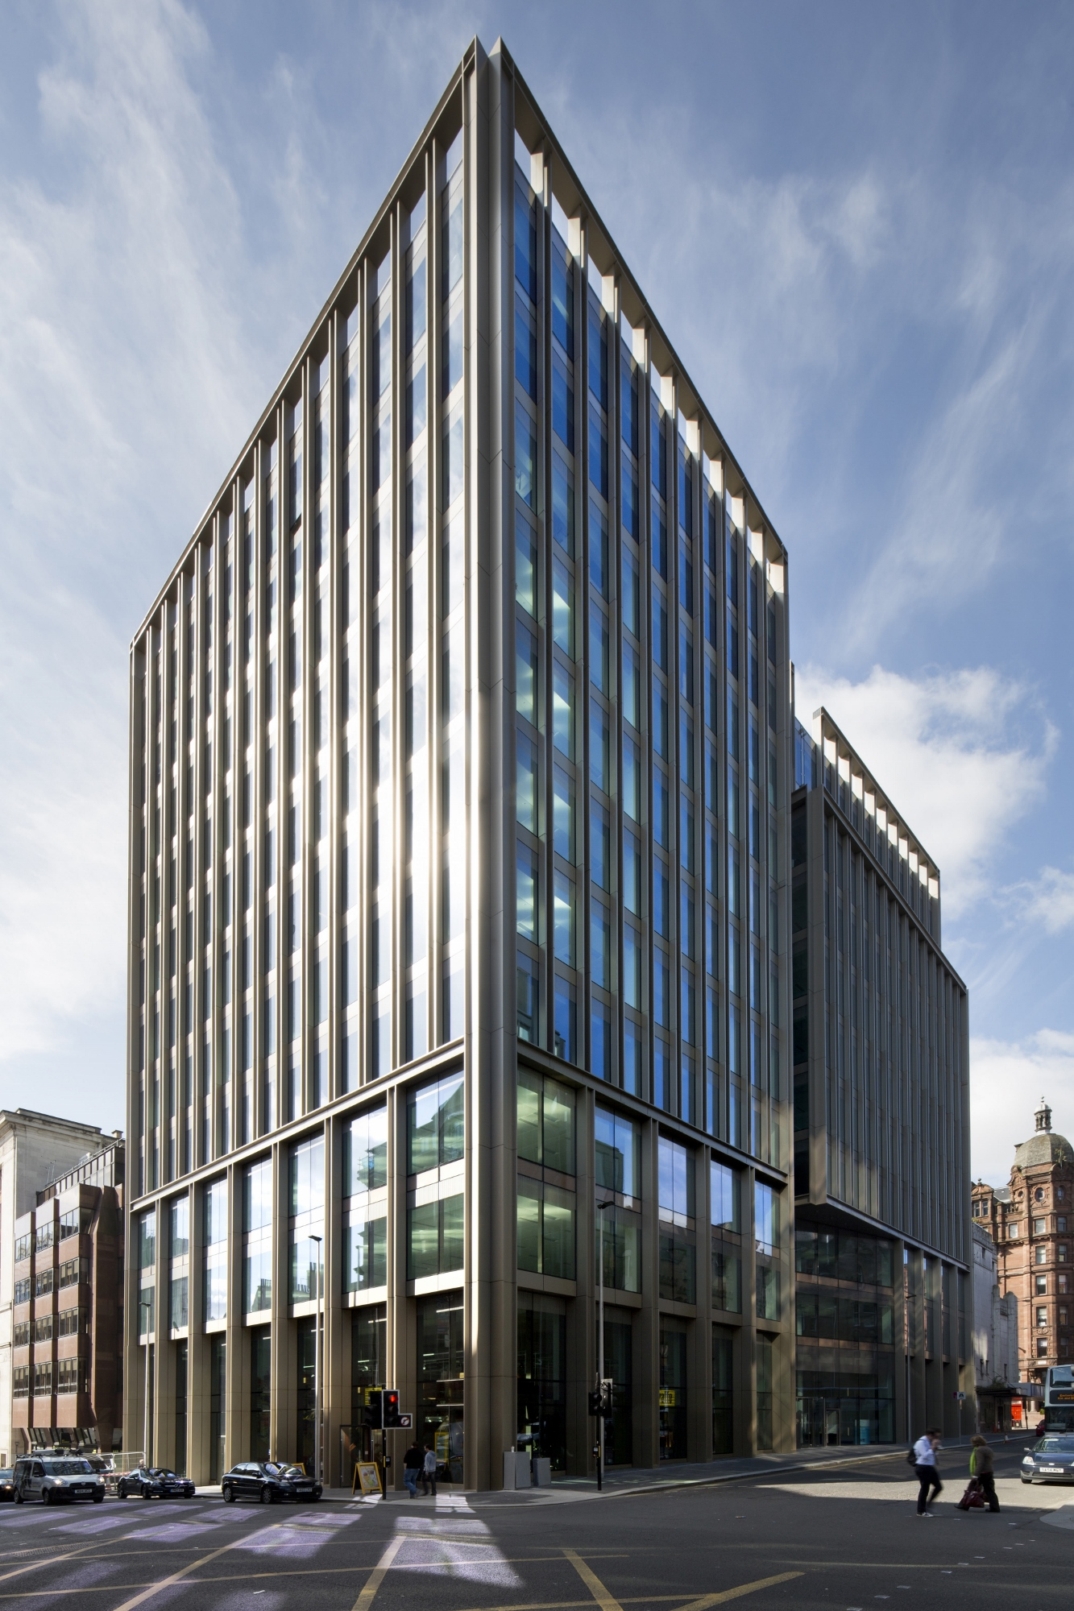 Global law firm commits to 1 West Regent Street